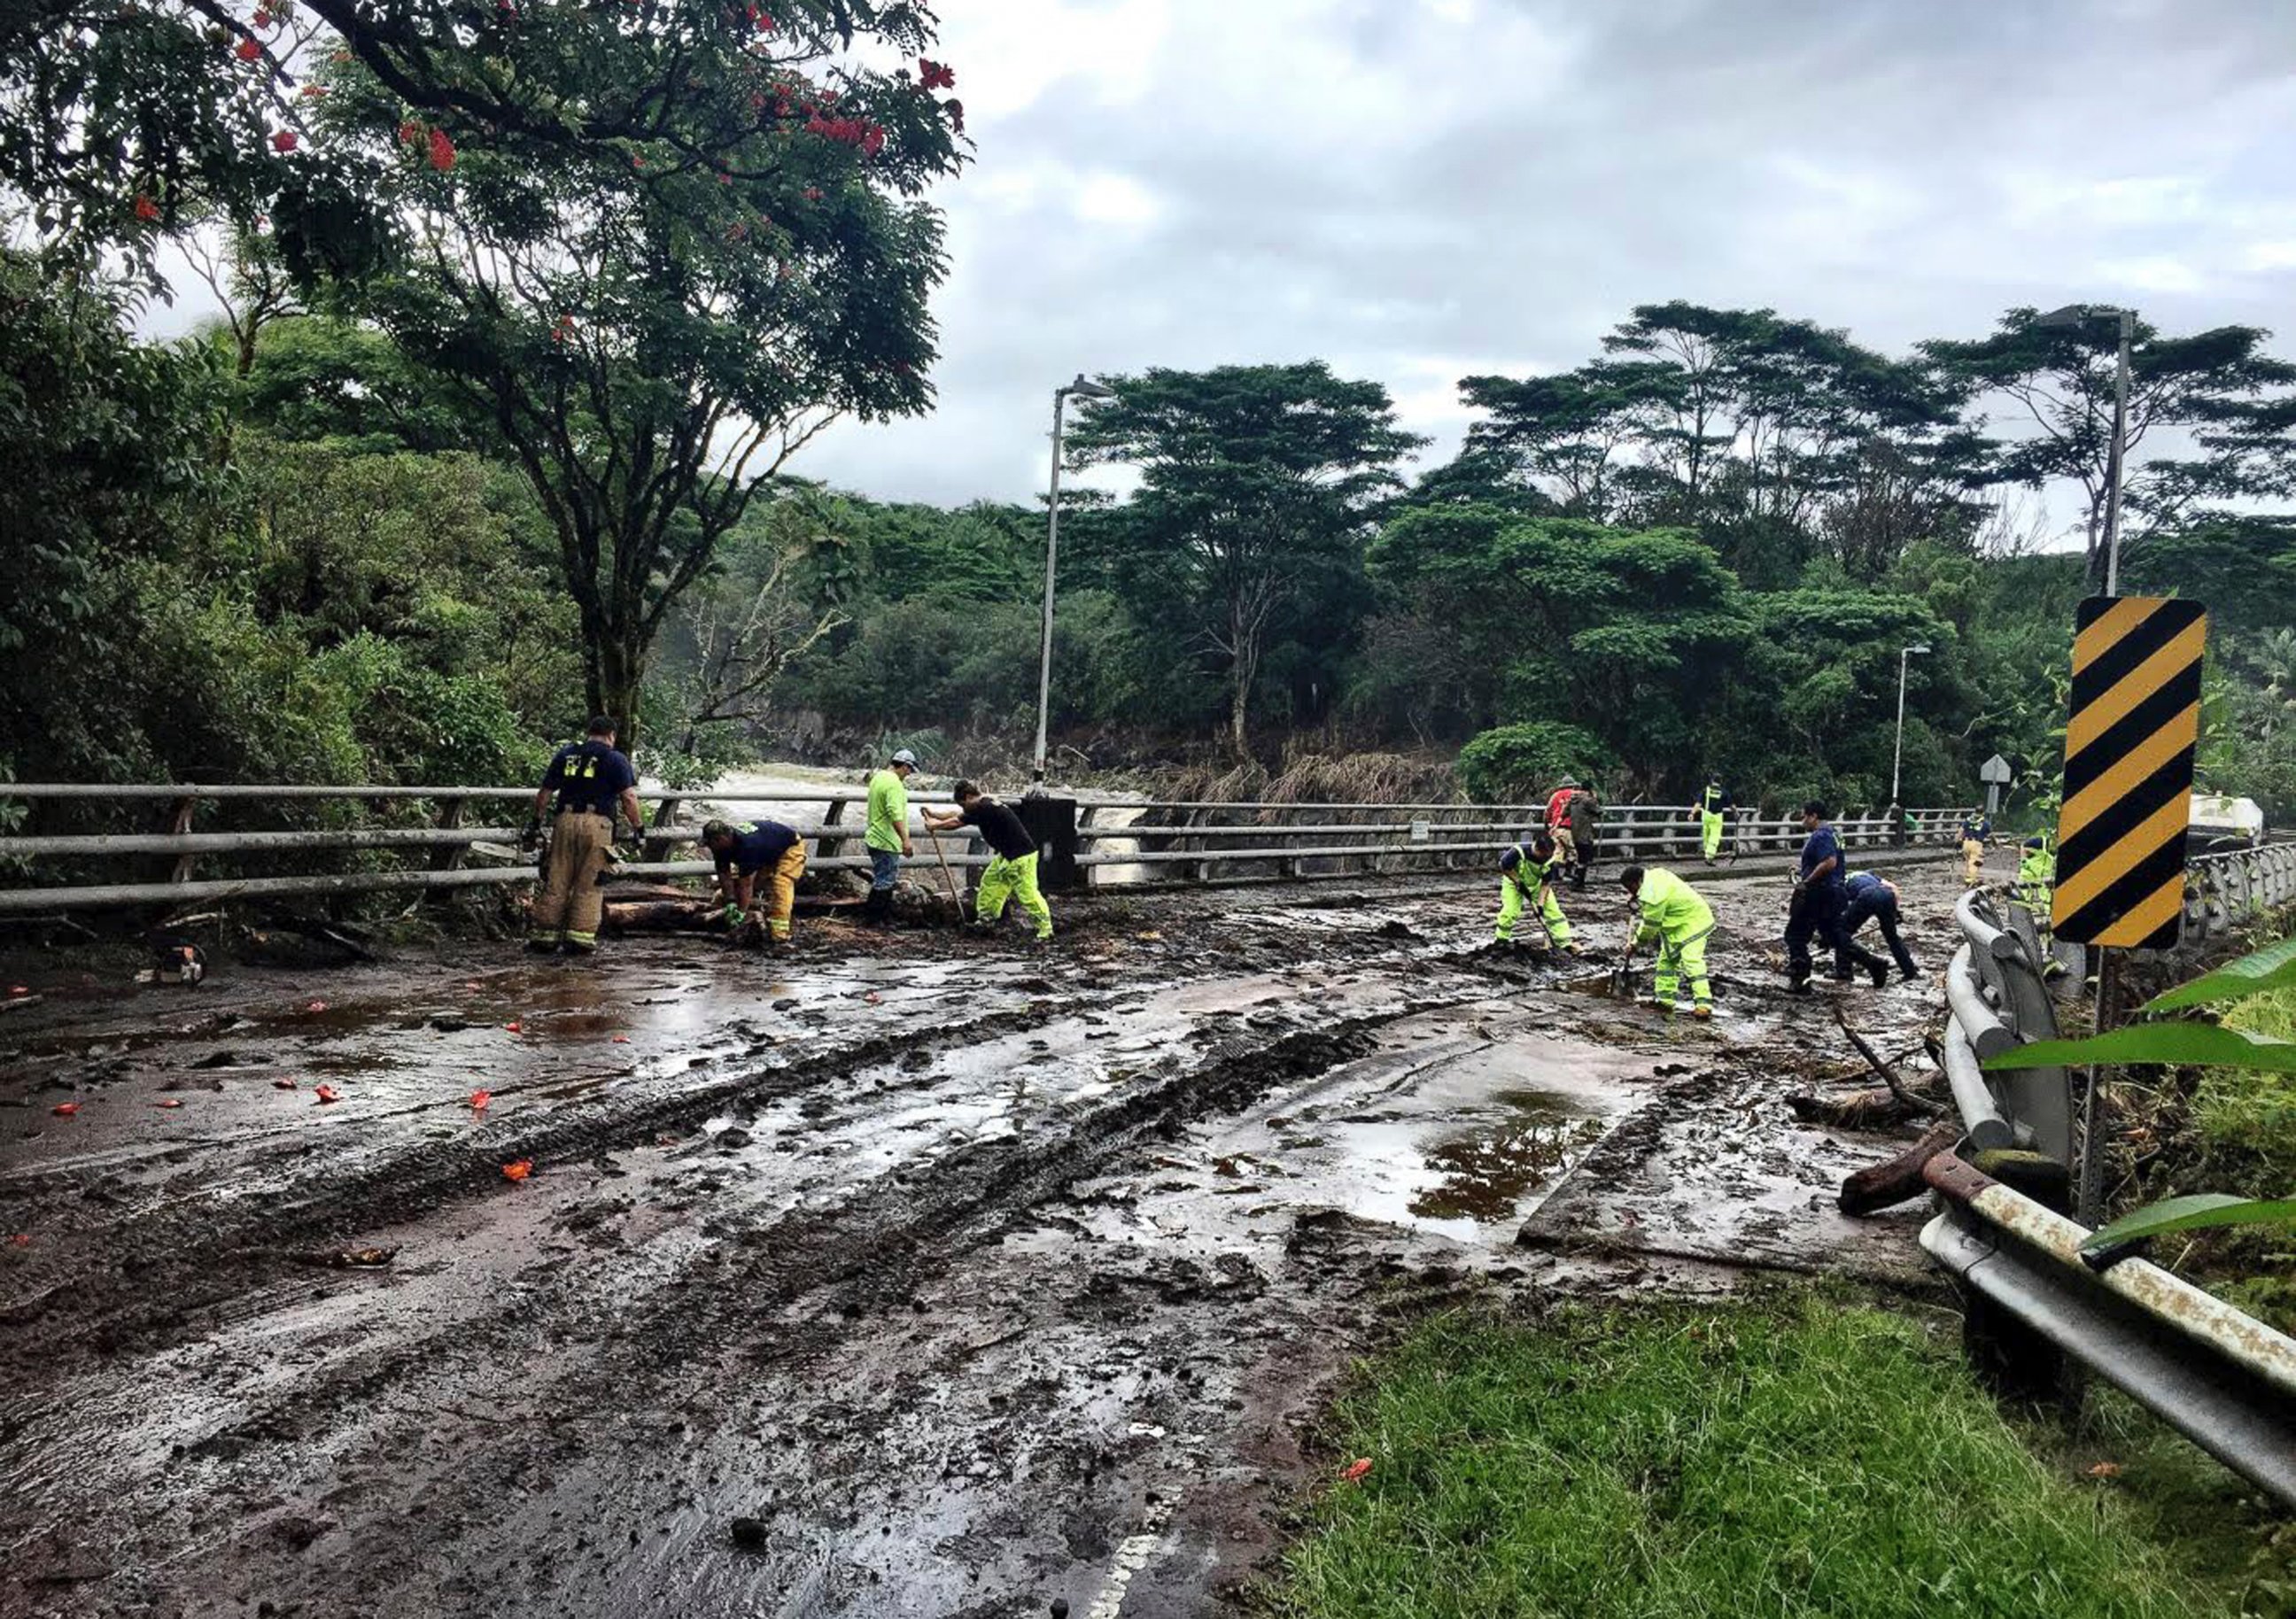 In this photo provided by Jessica Henricks, crews work at clearing damage from Hurricane Lane Friday, Aug. 24, 2018, near Hilo, Hawaii.